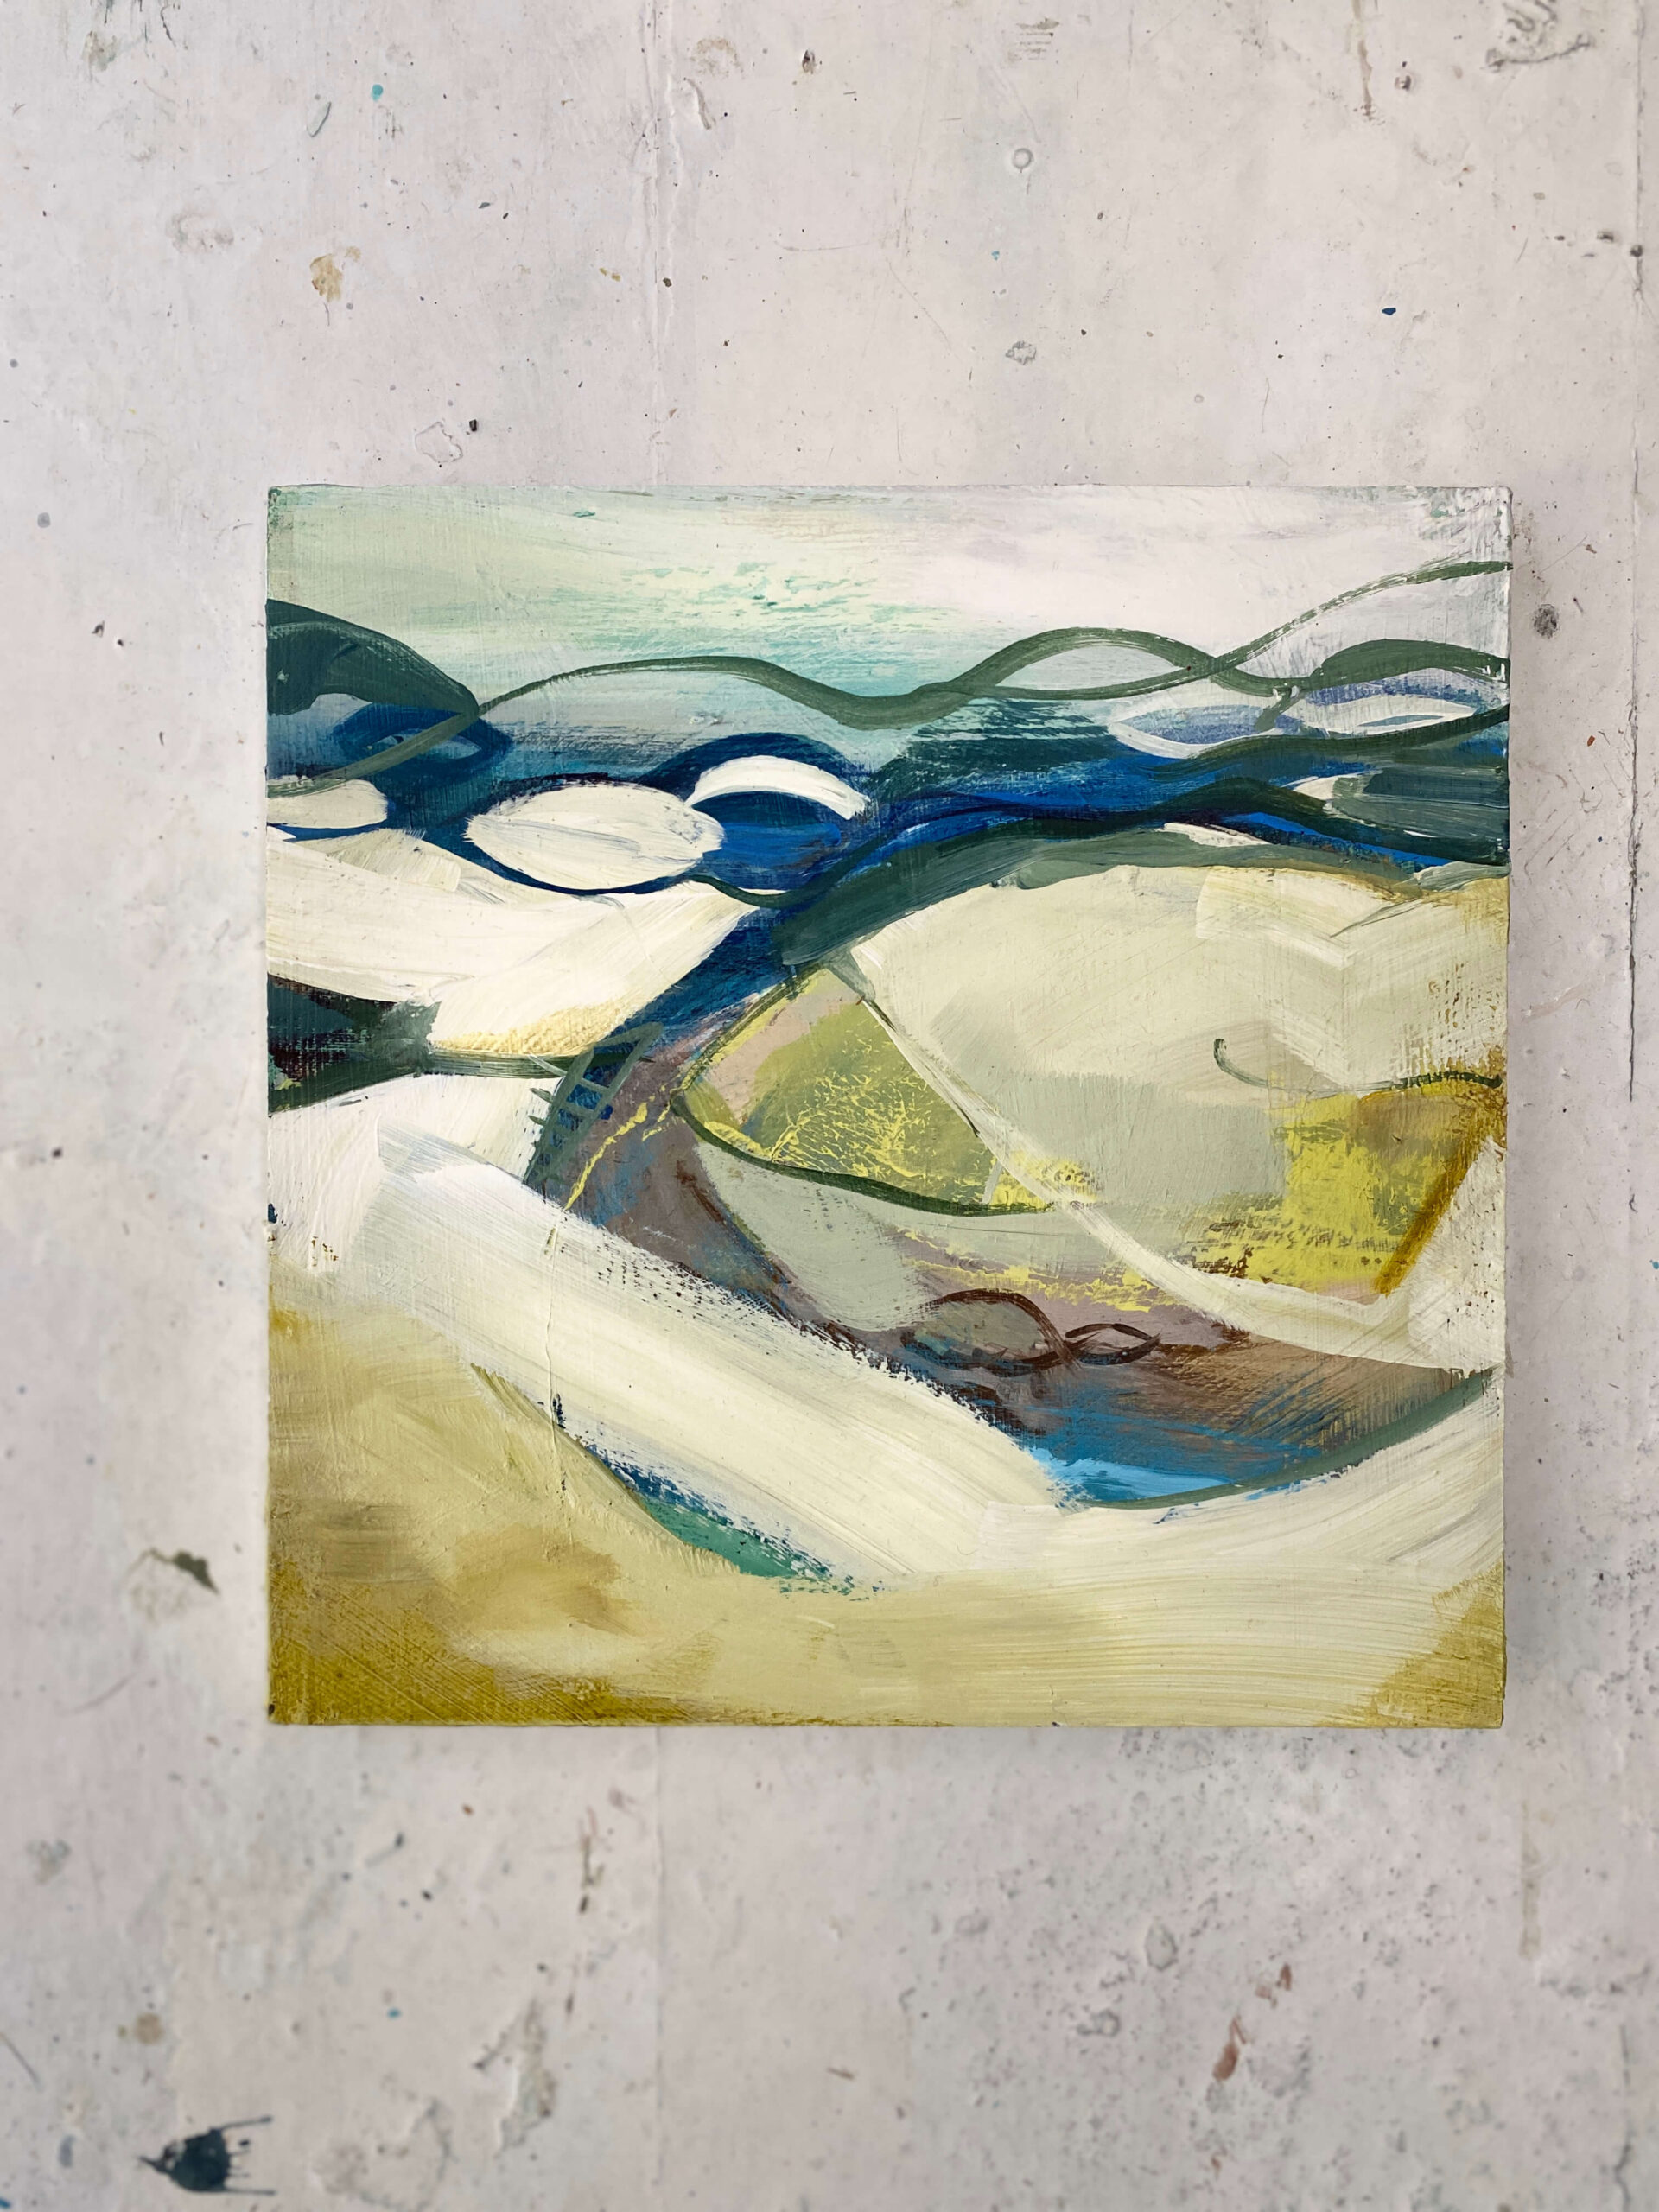 Whistling breeze on the estuary 22cm x 22cm Acrylic on board SOLD